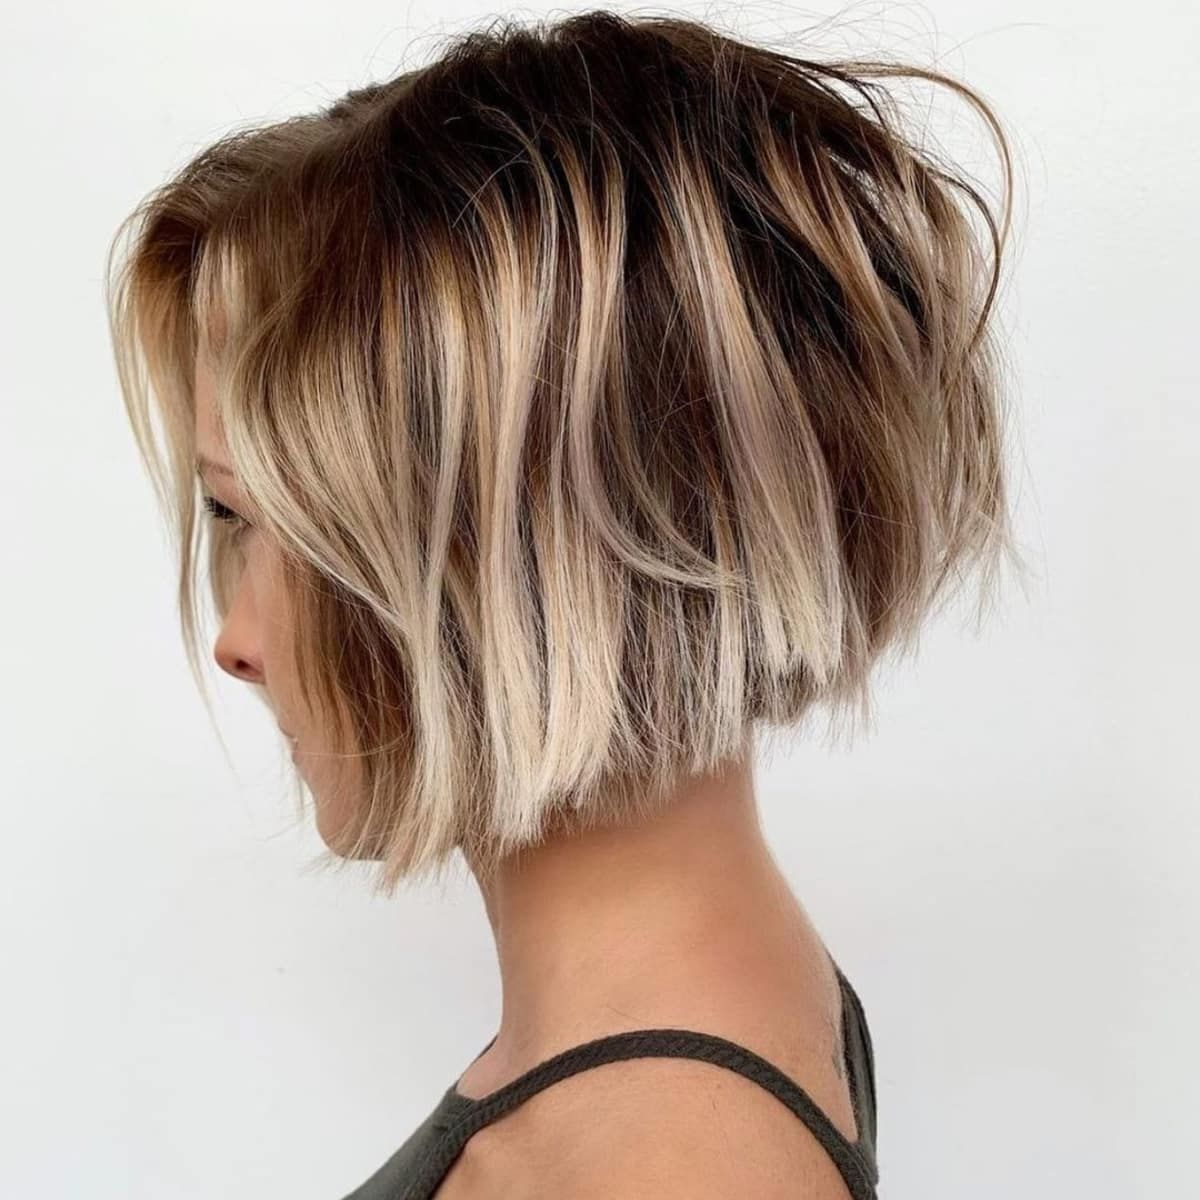 44 Most Requested Choppy Haircuts For A Subtly Edgy Style Regarding Well Known Two Tone Messy Bob (View 7 of 20)